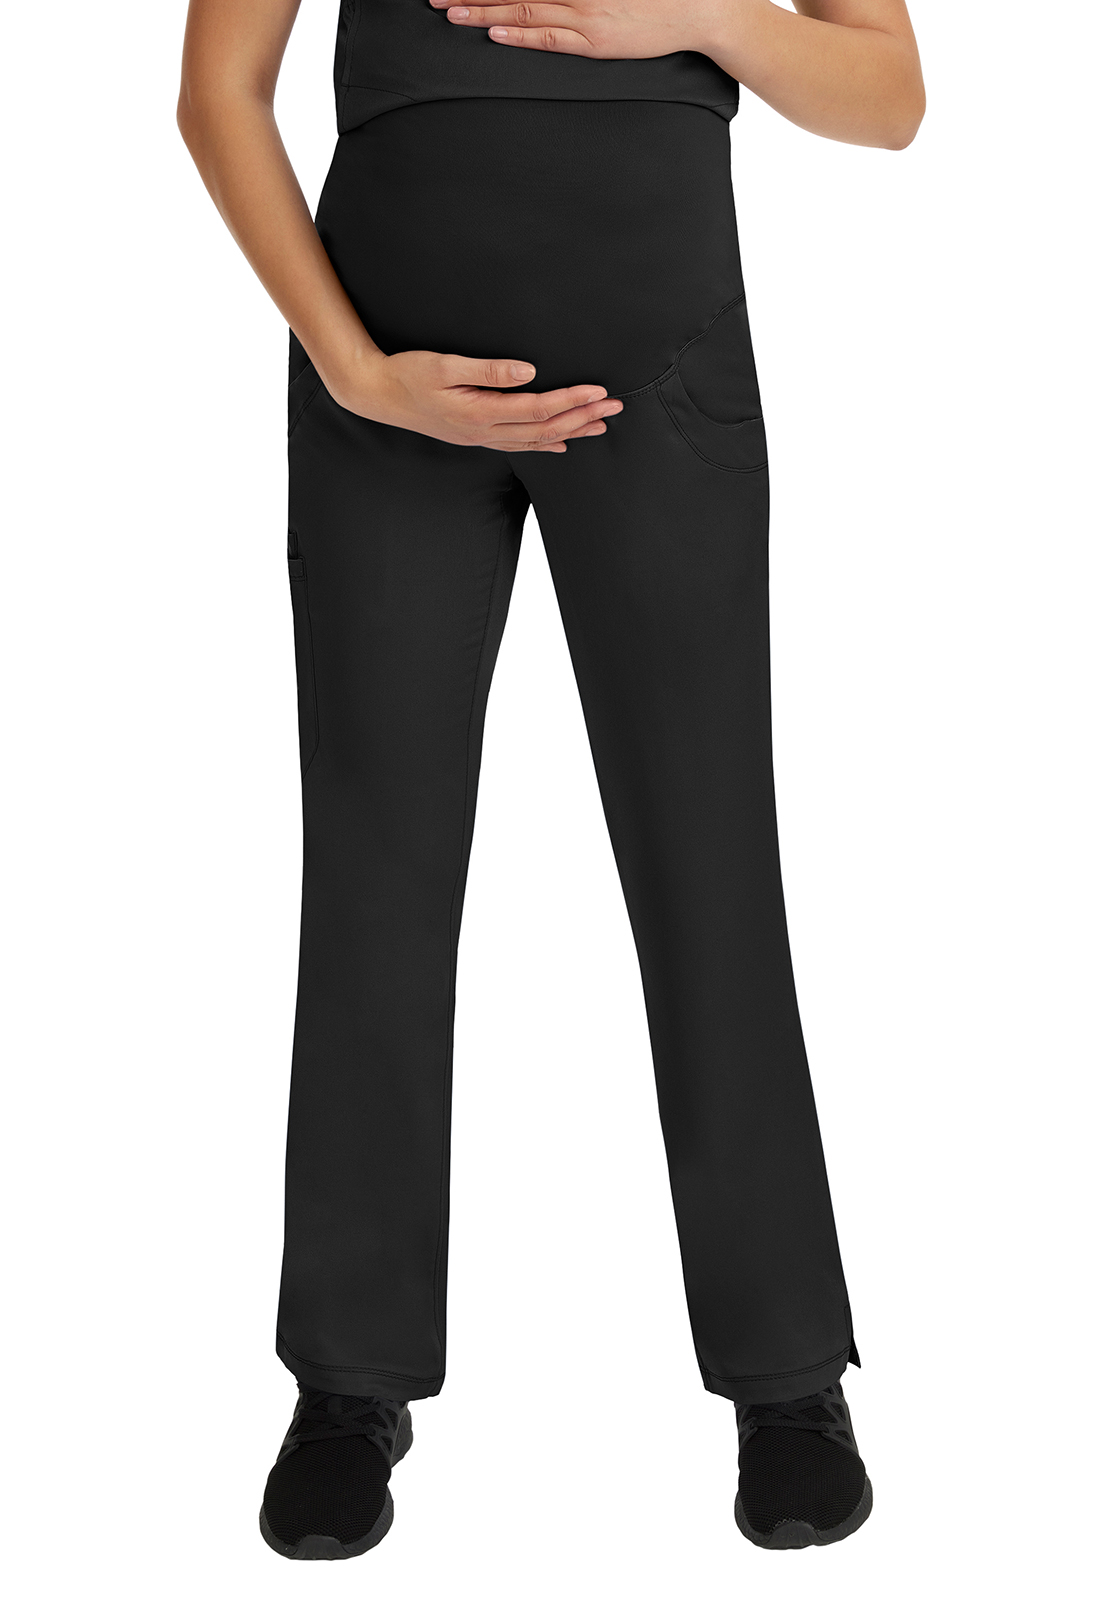 Healing Hands HH Works Rose Maternity Pant-